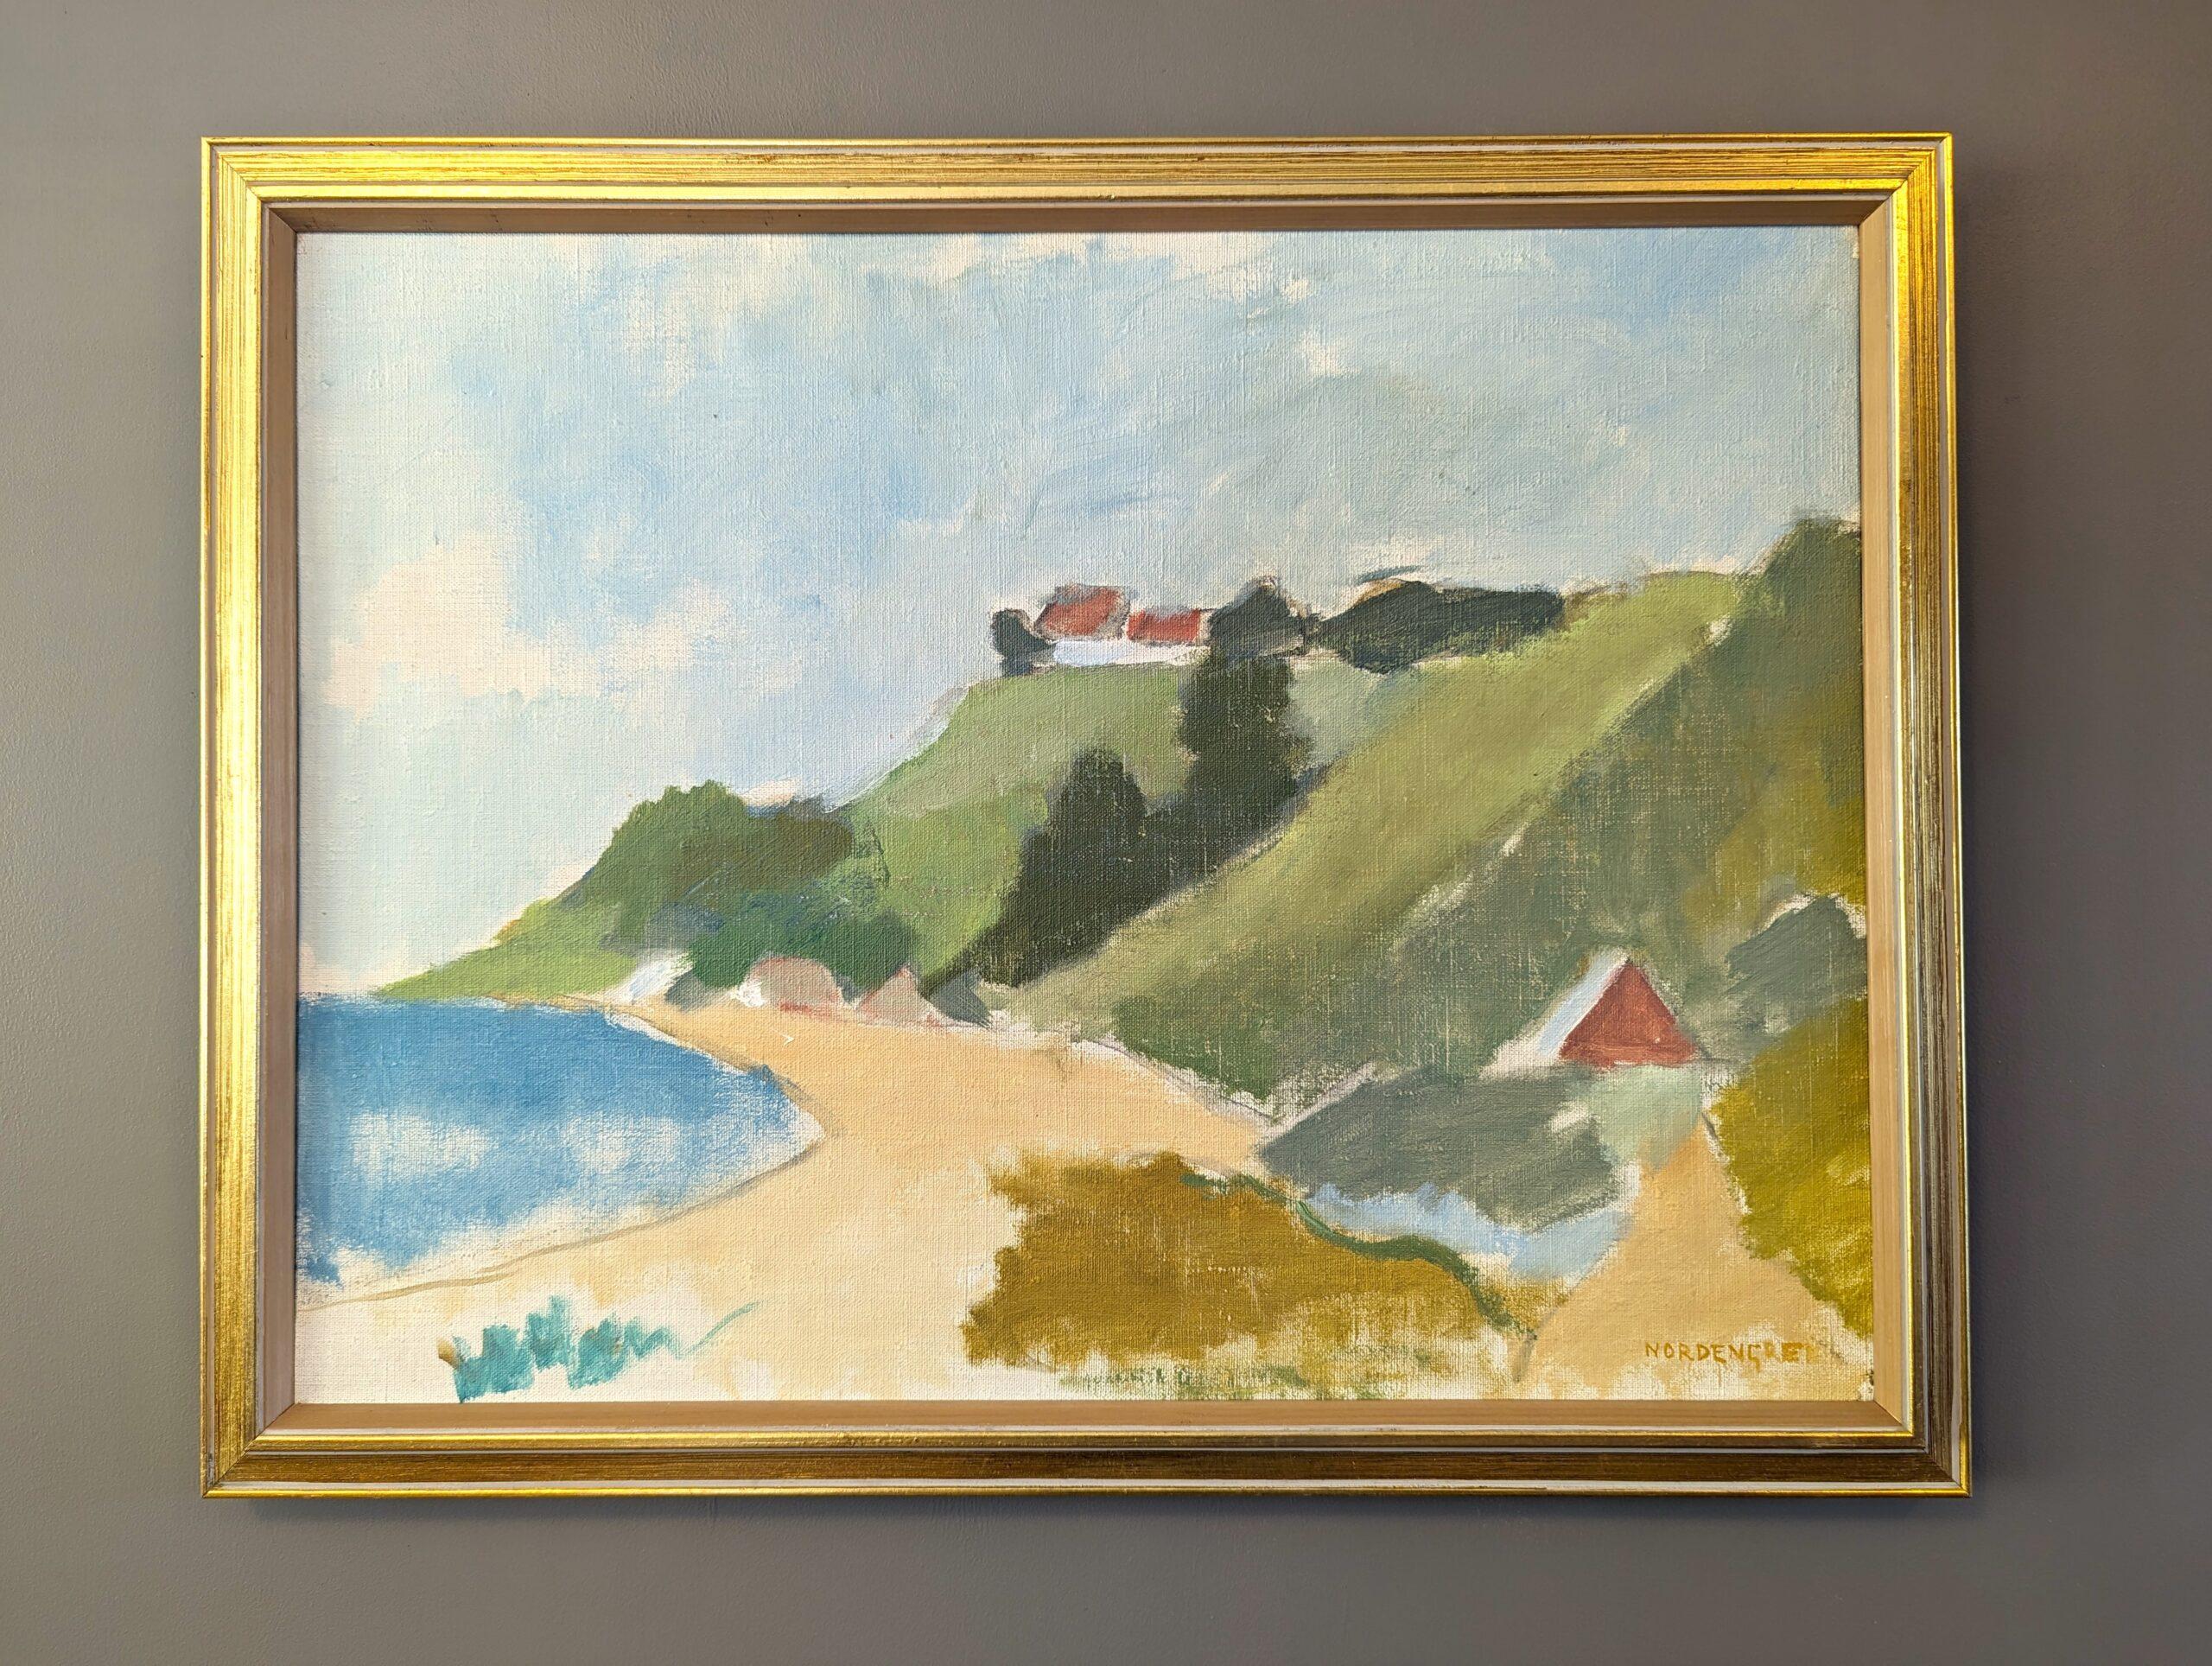 COASTAL HILL
Size: 43 x 55.5 cm (including frame)
Oil on Canvas

A soothing and inviting mid-century modernist style coastal landscape composition, executed in oil onto canvas.

The painting depicts a tranquil view of houses nestled atop a lush